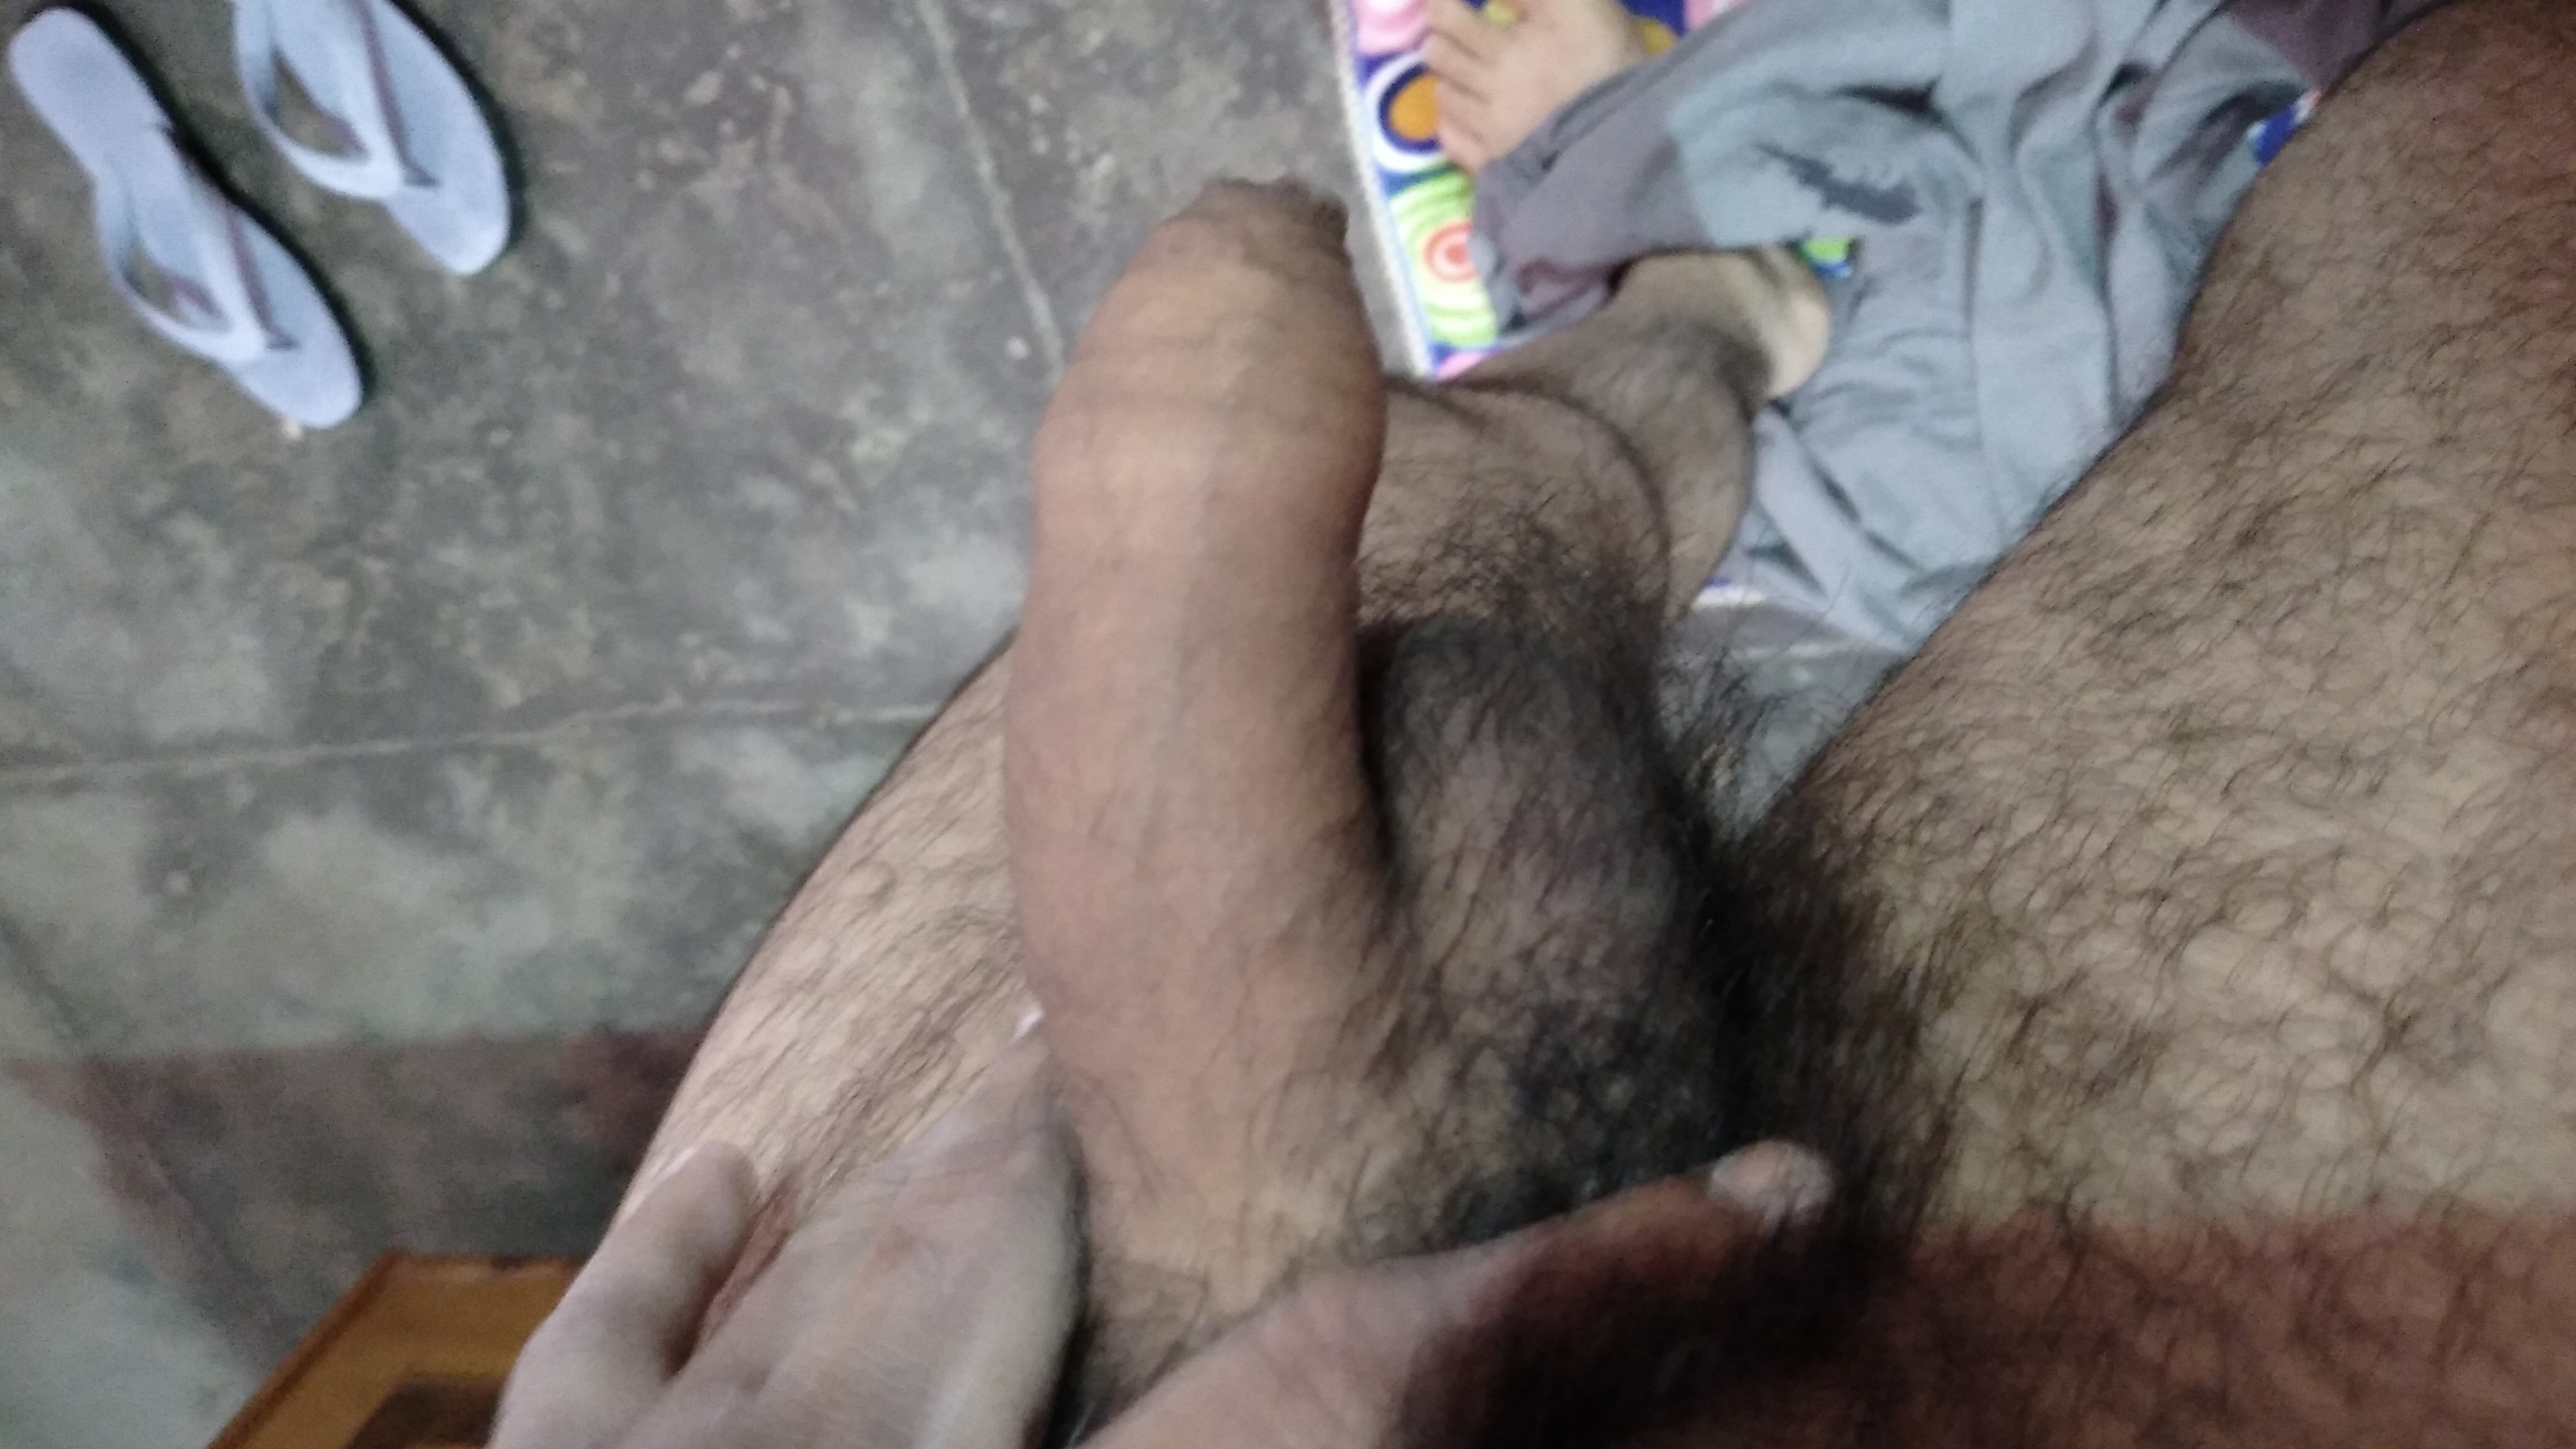 Indian middle age man show his pennis